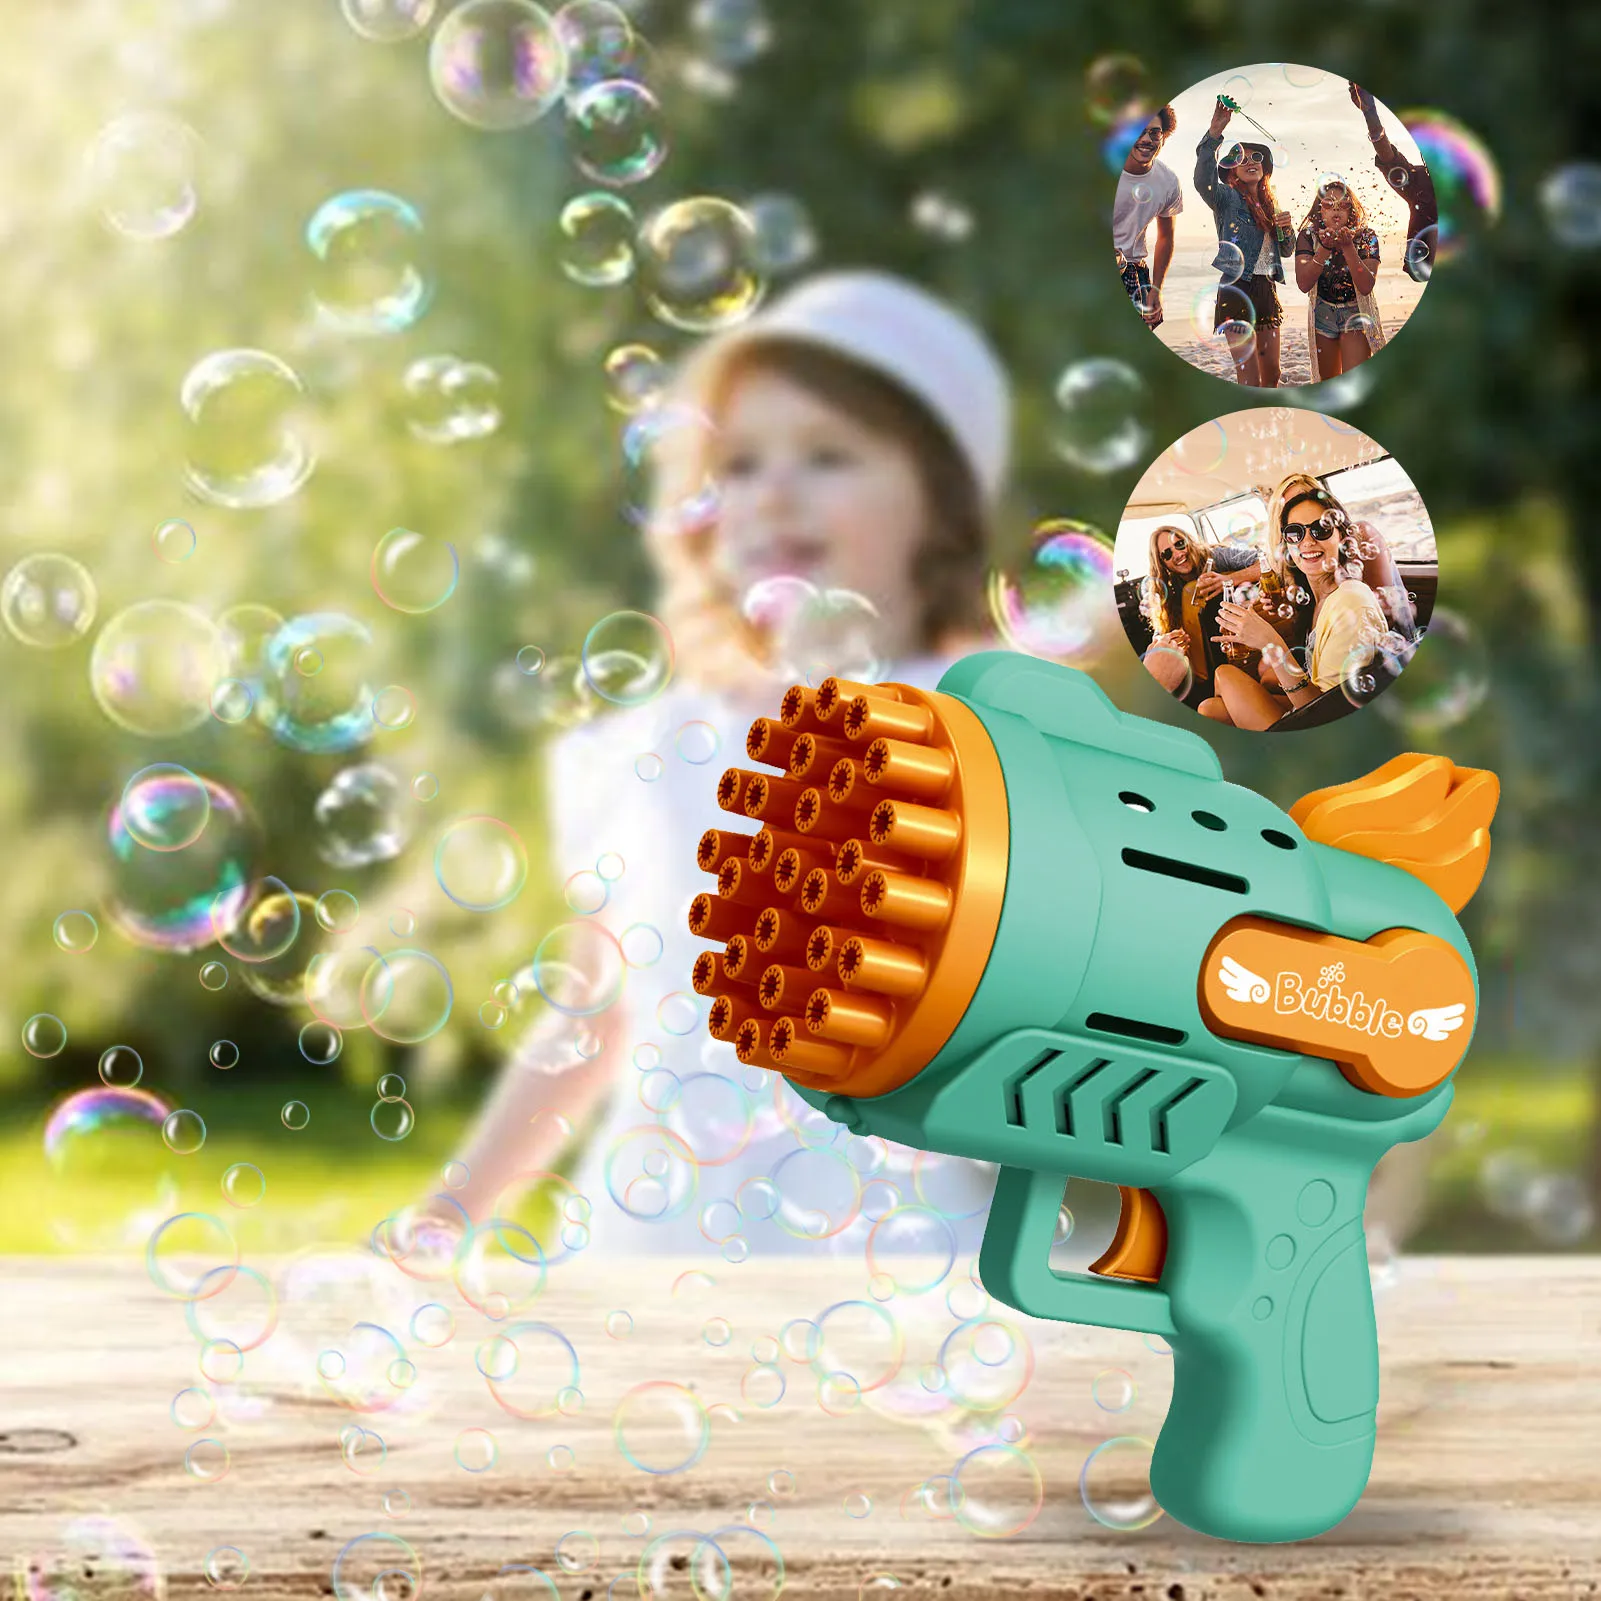 Bubble Gun Rocket 29 Hole Automatic Soap Bubbles Machine Outdoor Toy for Boys Birthday Gifts Wedding Party Children Summer Gift bubble toy festival bubble blowing machine new year celebrate bubble toy seasonal party supplies dropship